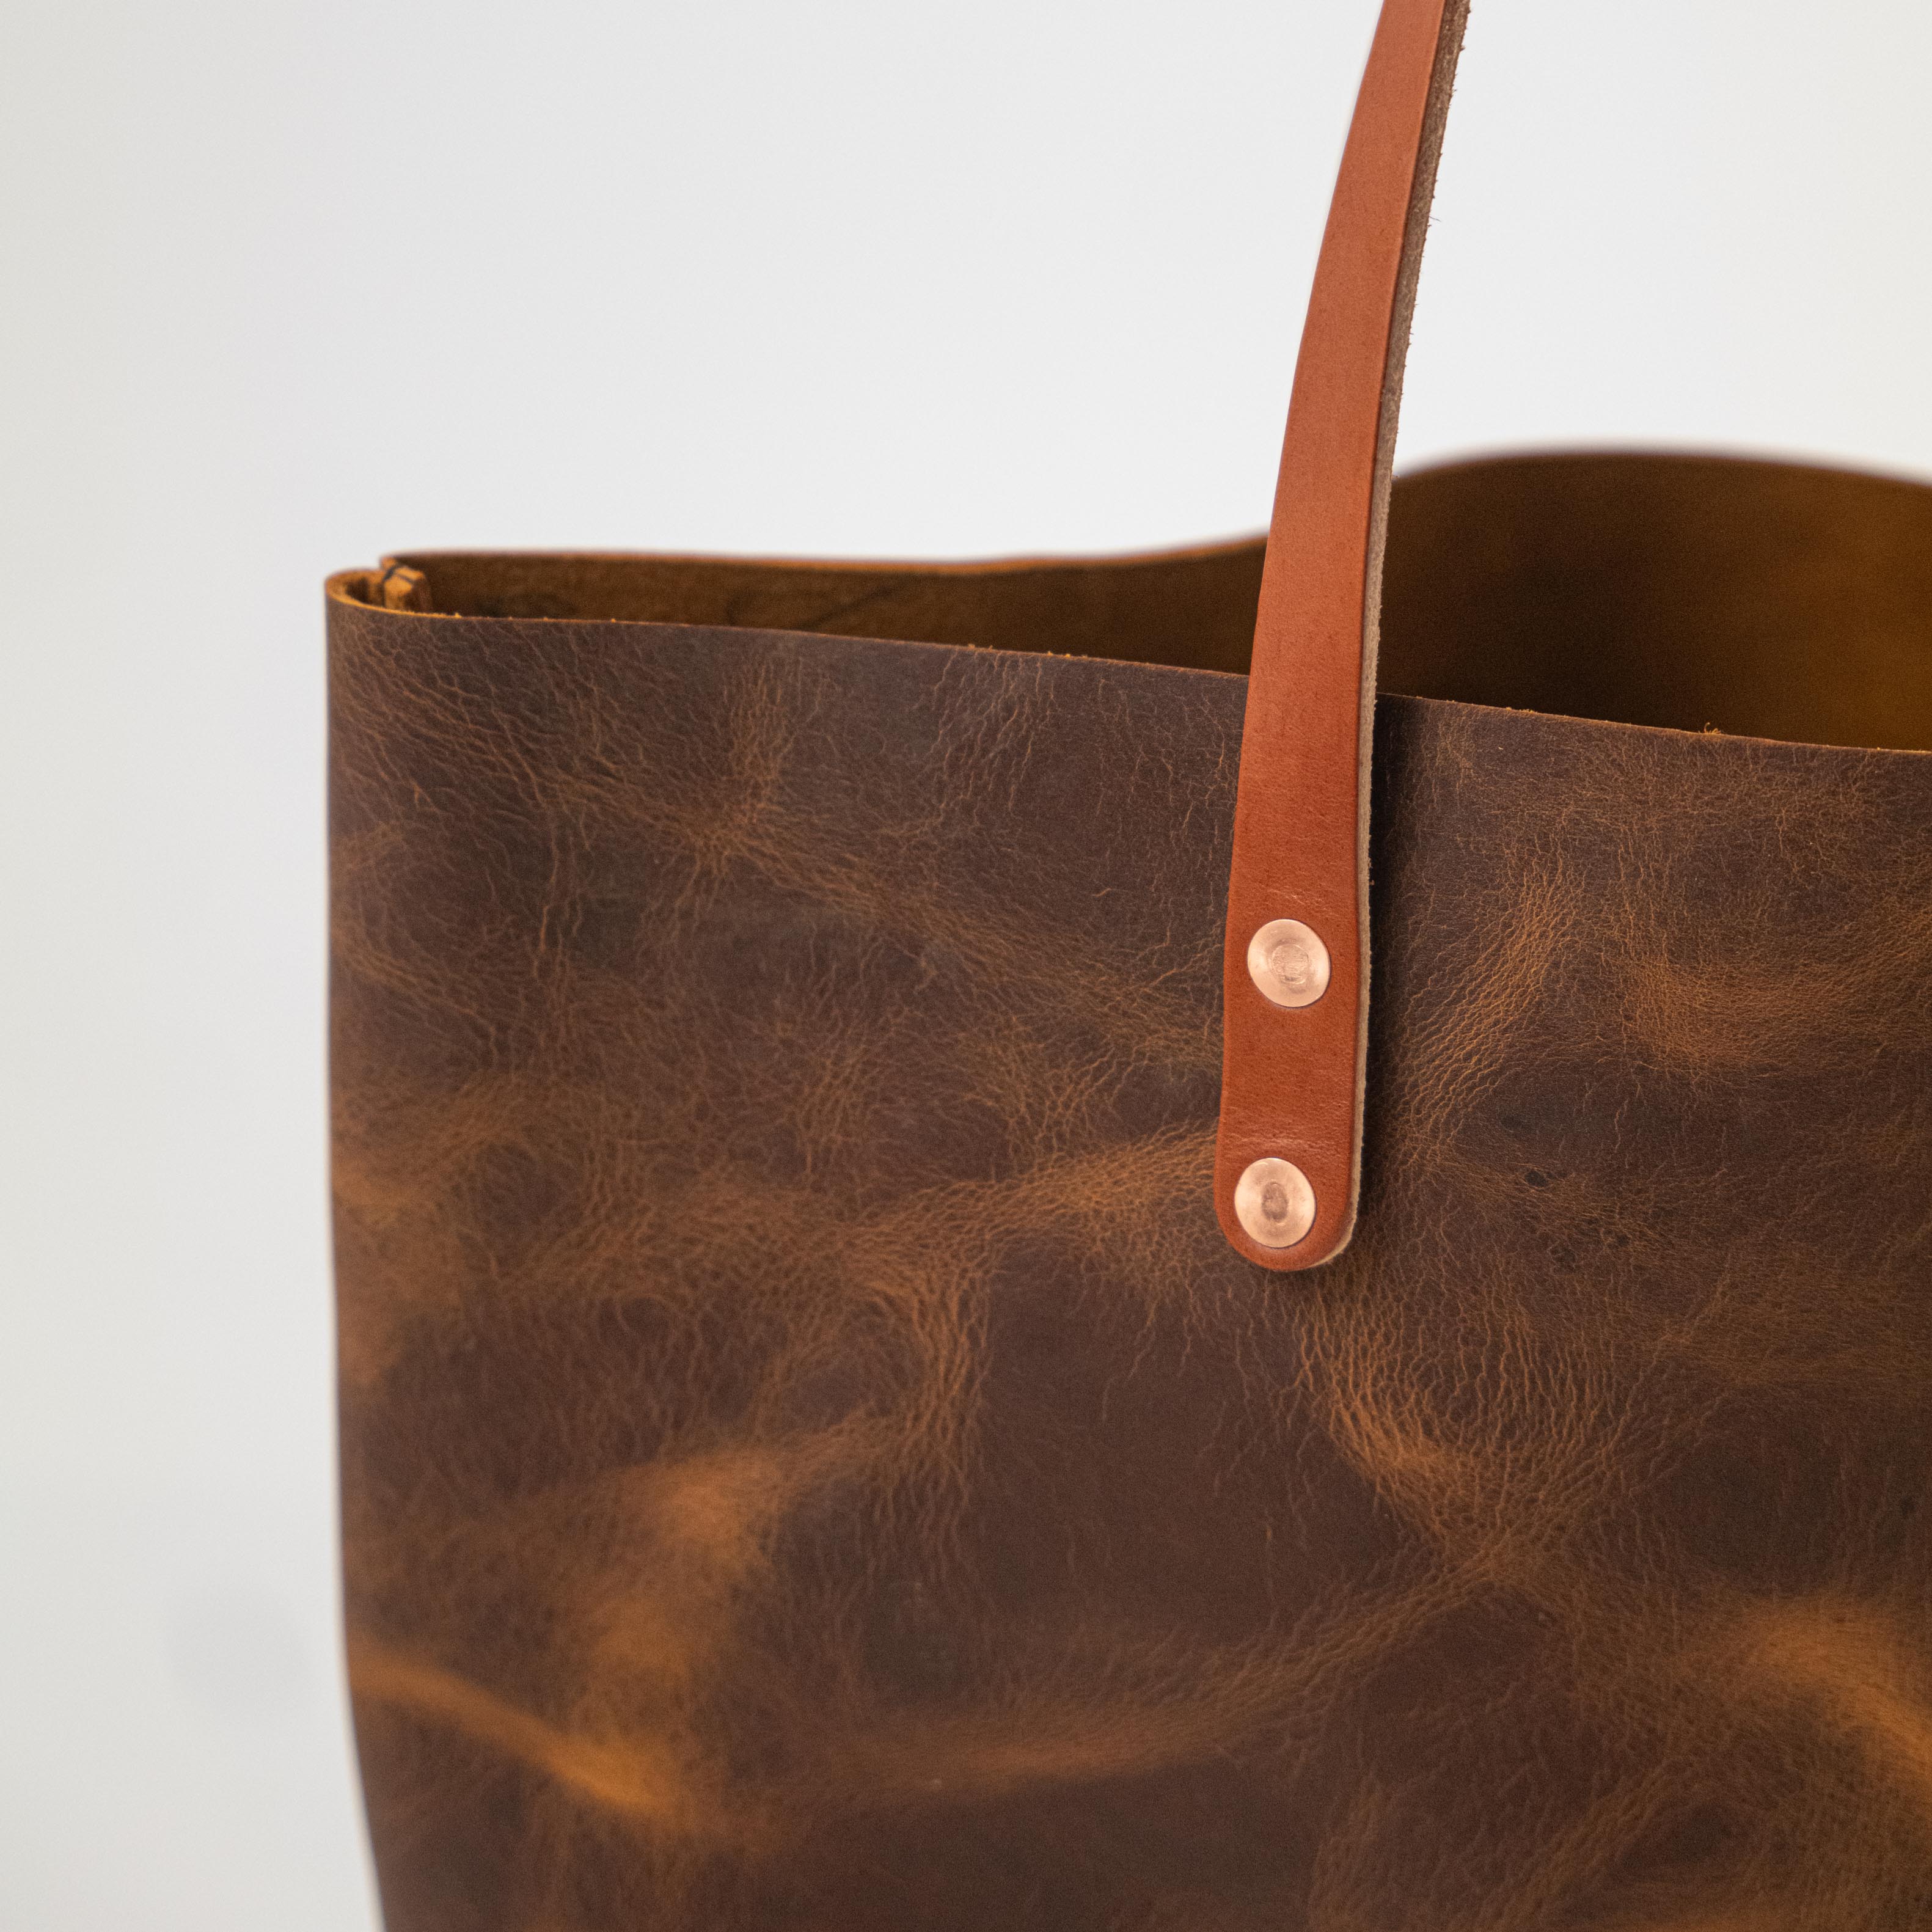 Tobacco East West Tote